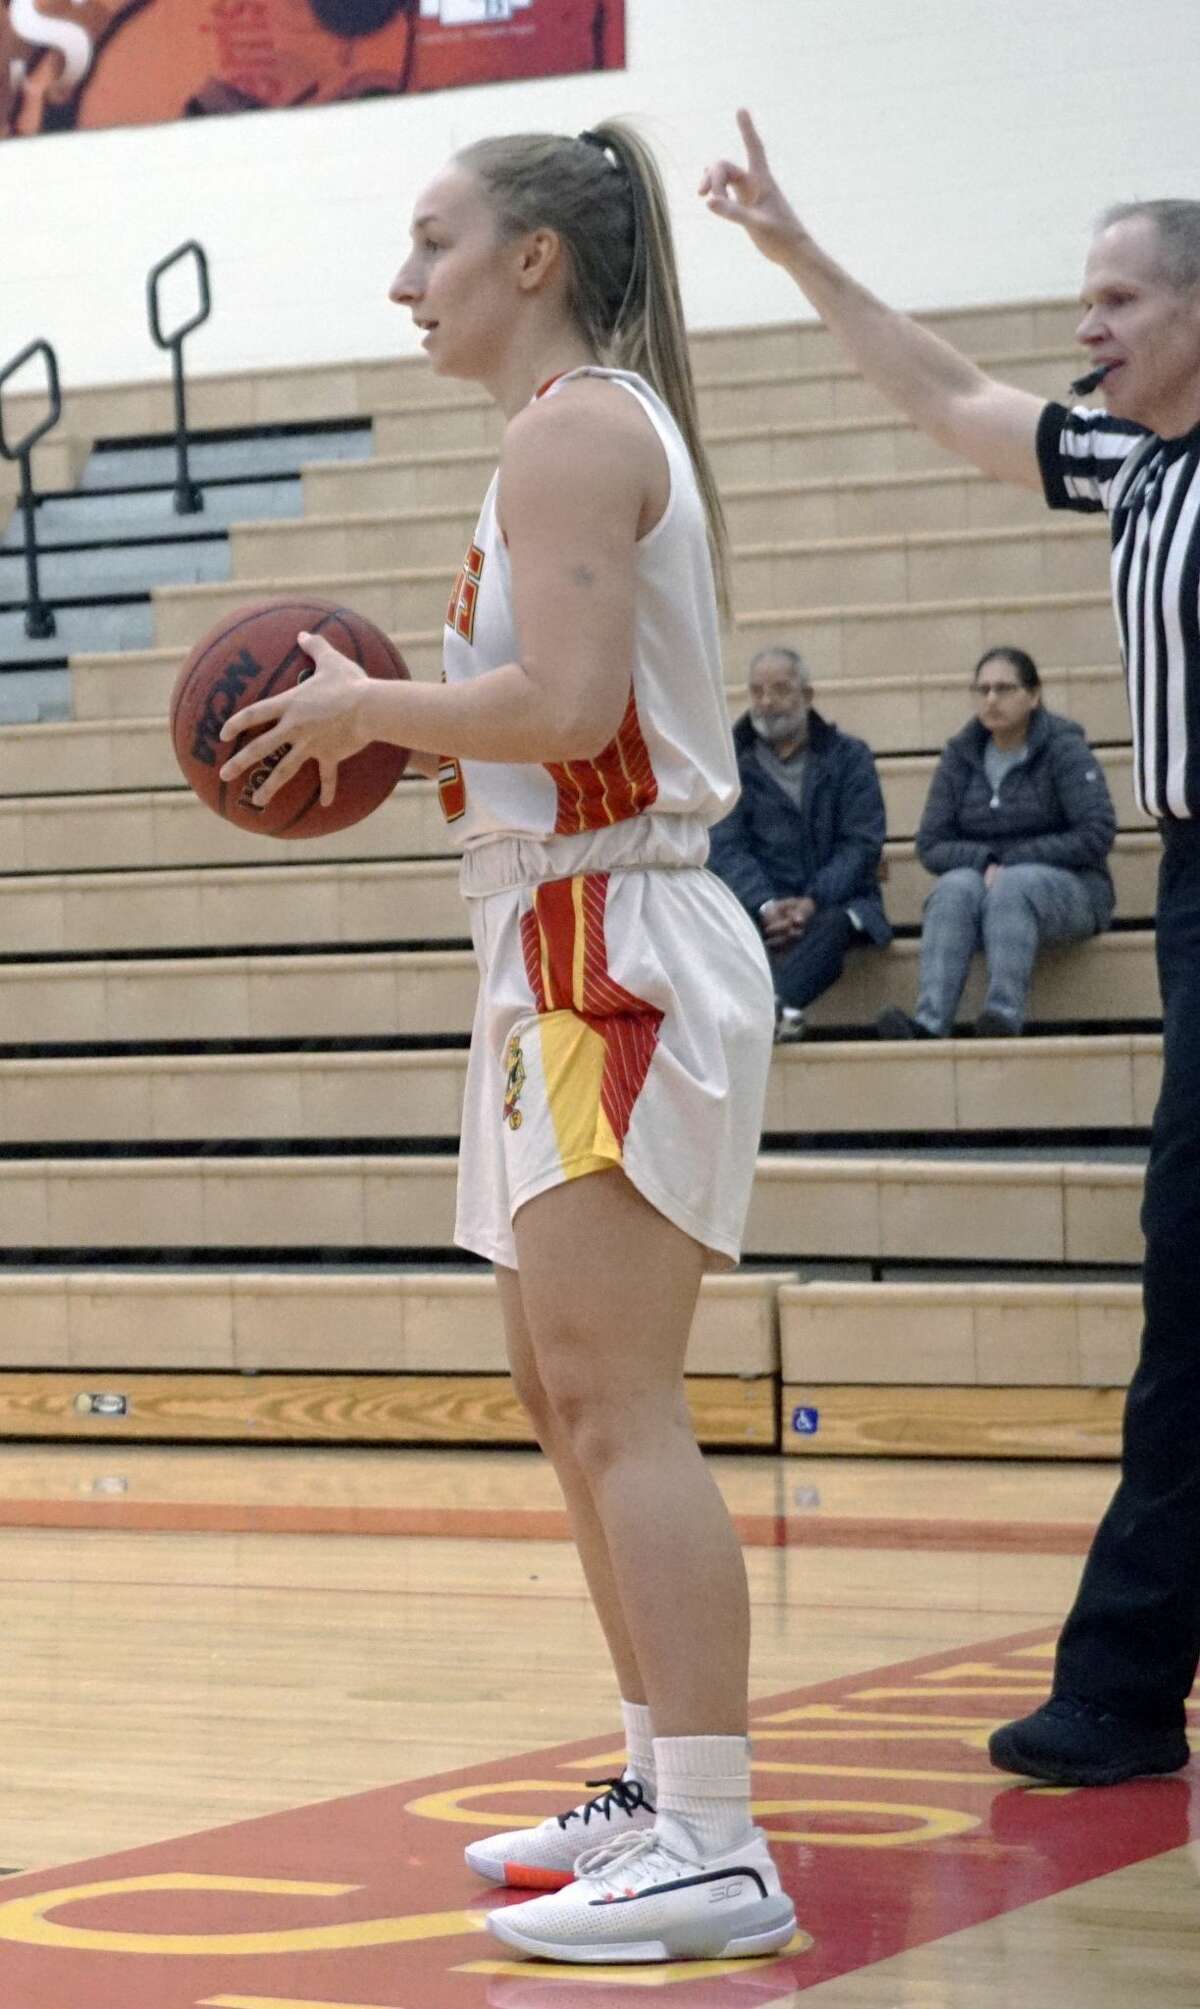 Ferris State's women's basketball team was defeated 82-68 by Saginaw Valley State Thursday night at Jim Wink Arena.